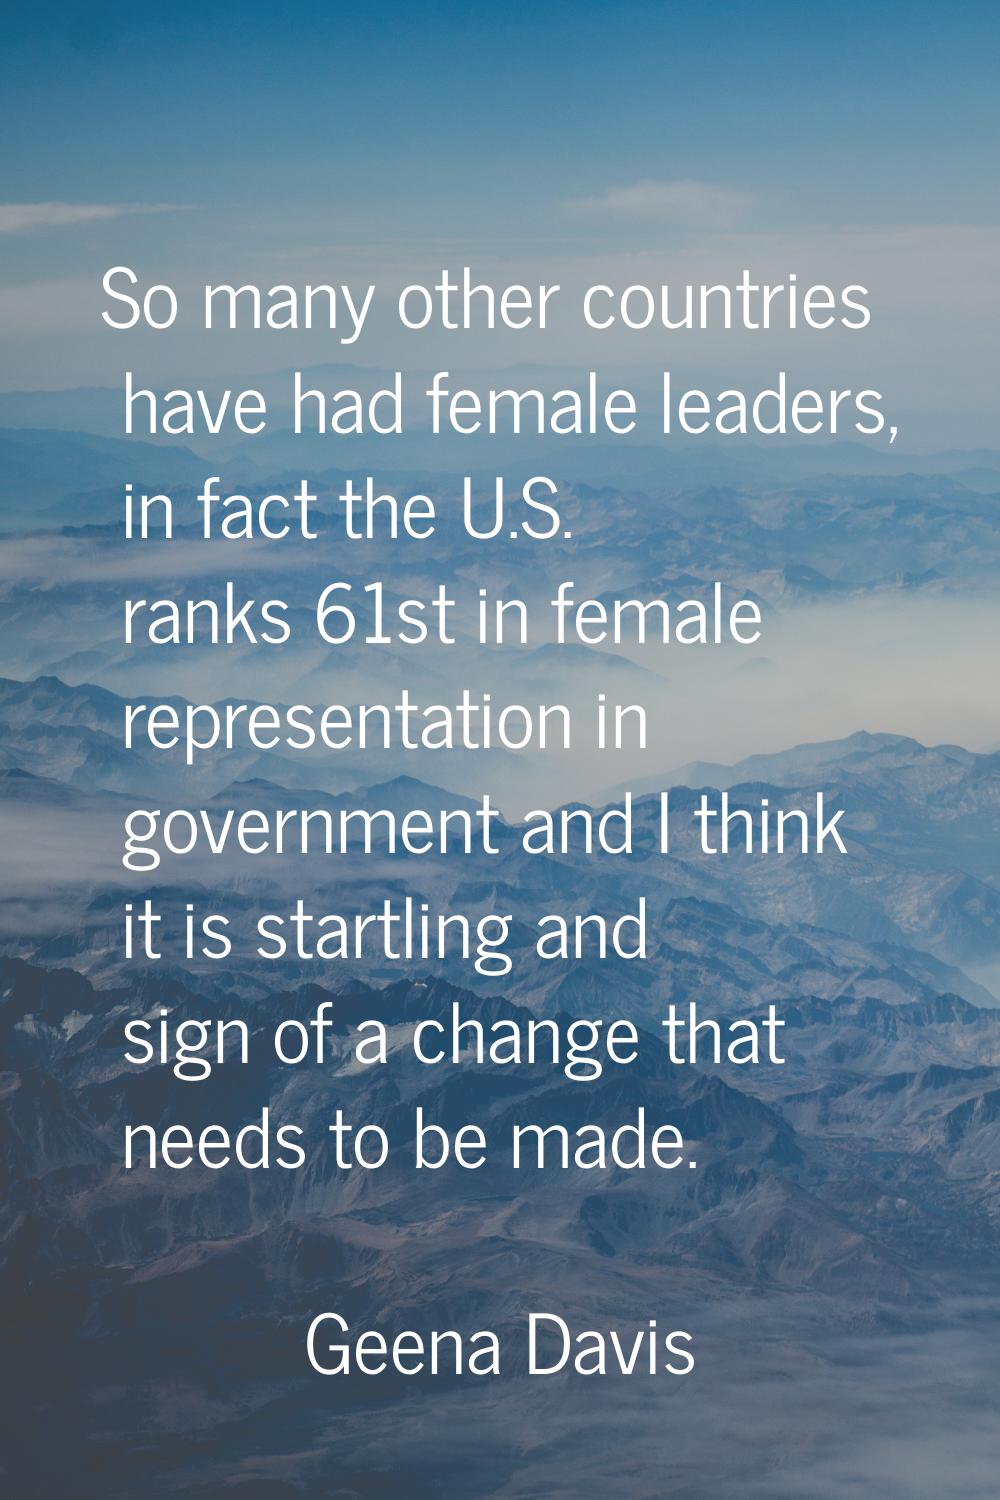 So many other countries have had female leaders, in fact the U.S. ranks 61st in female representati